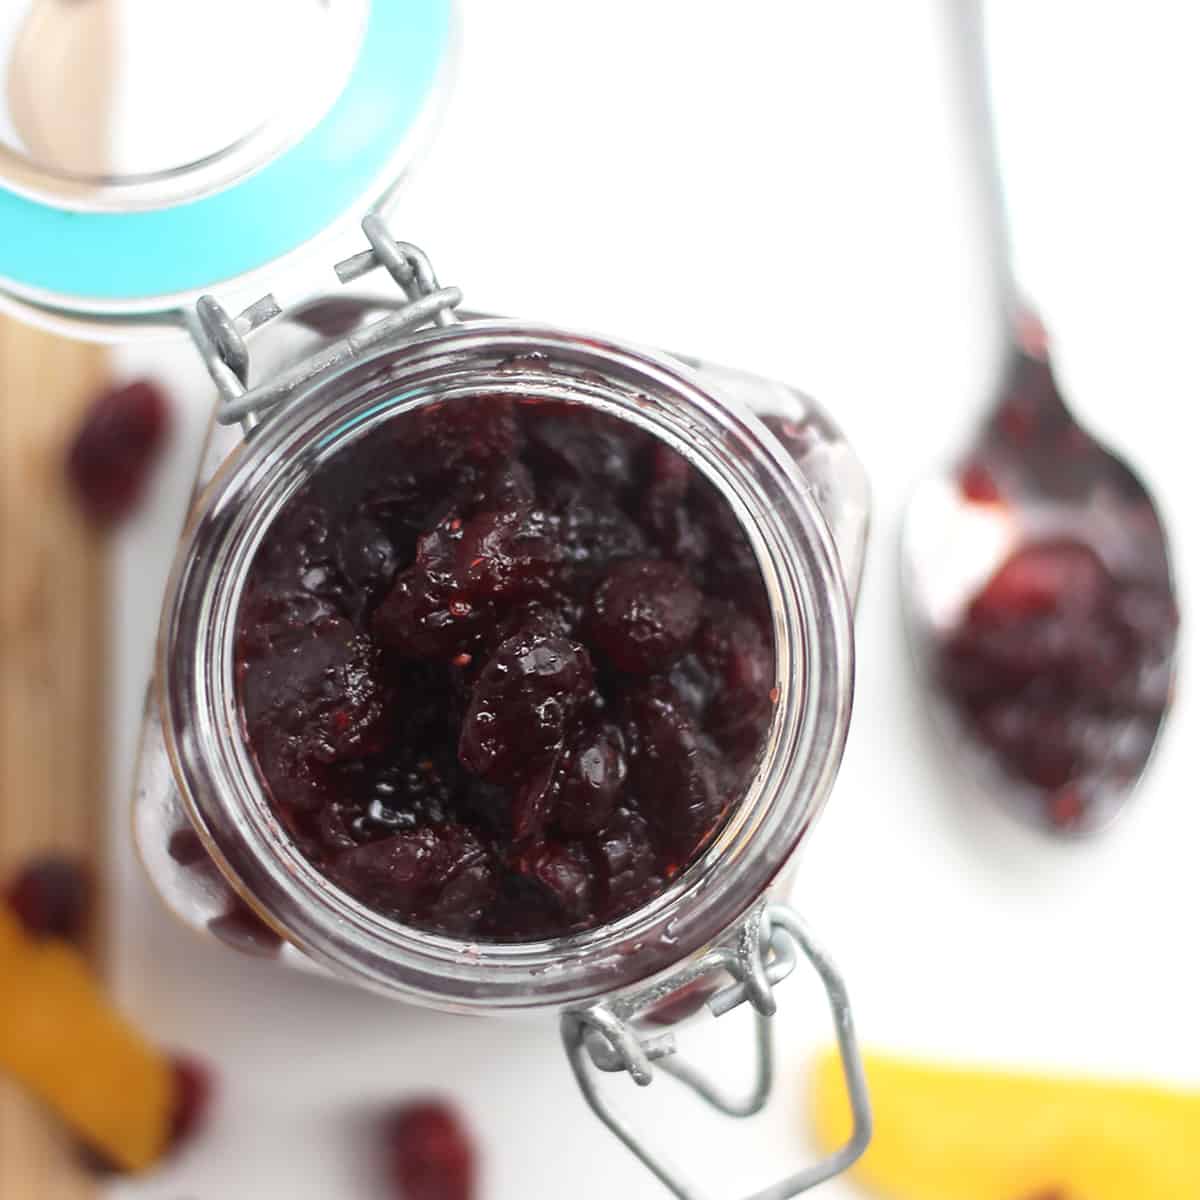 Overhead shot of cranberry sauce in a glass jar.